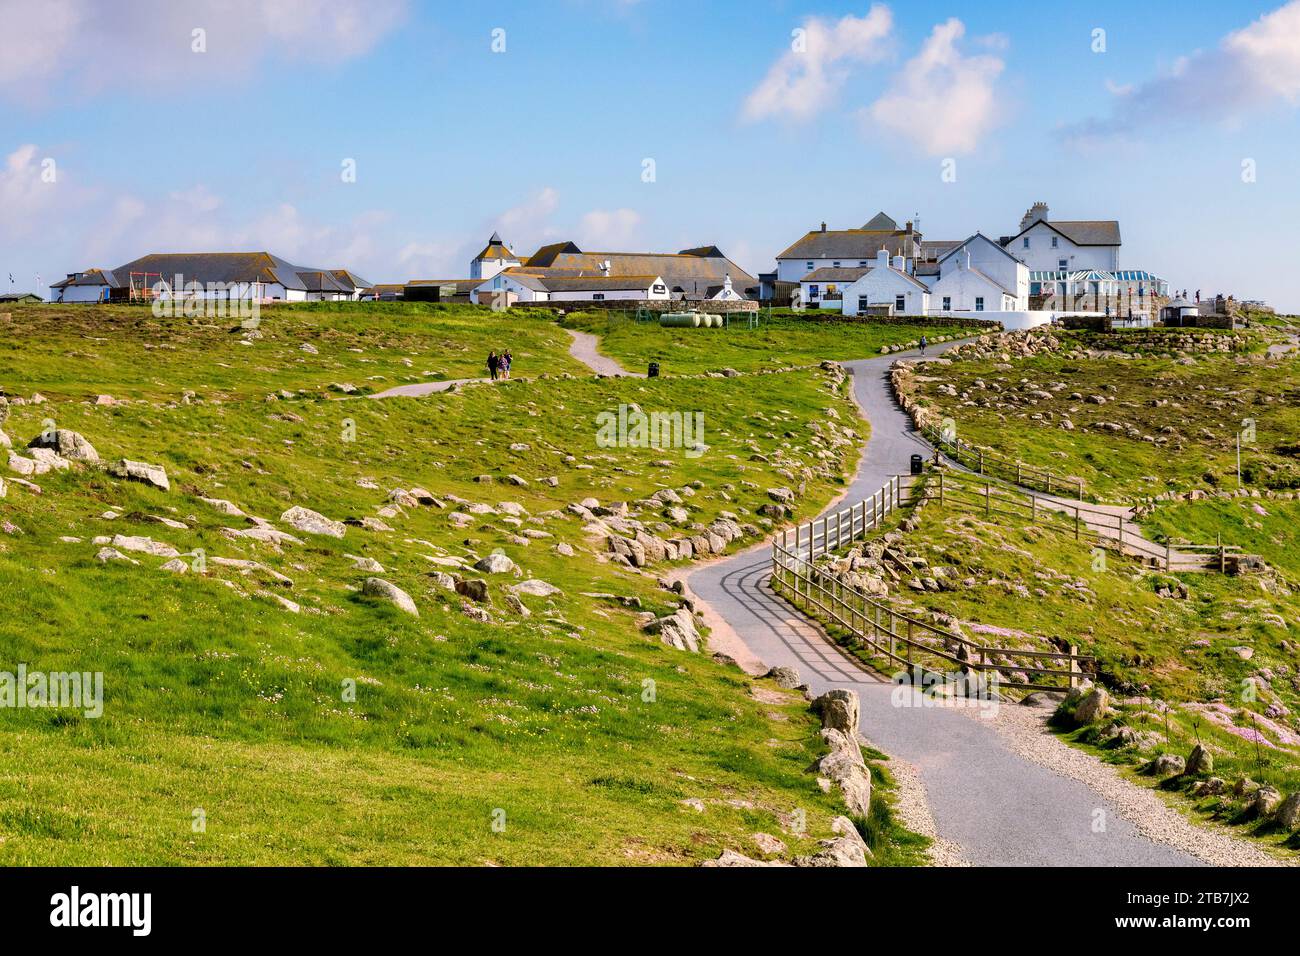 17 May 2023: Land's End, Cornwall, UK - The Land's End Landmark visitor attraction, and the path from Sennen Cove, part of the South West Coast Path. Stock Photo